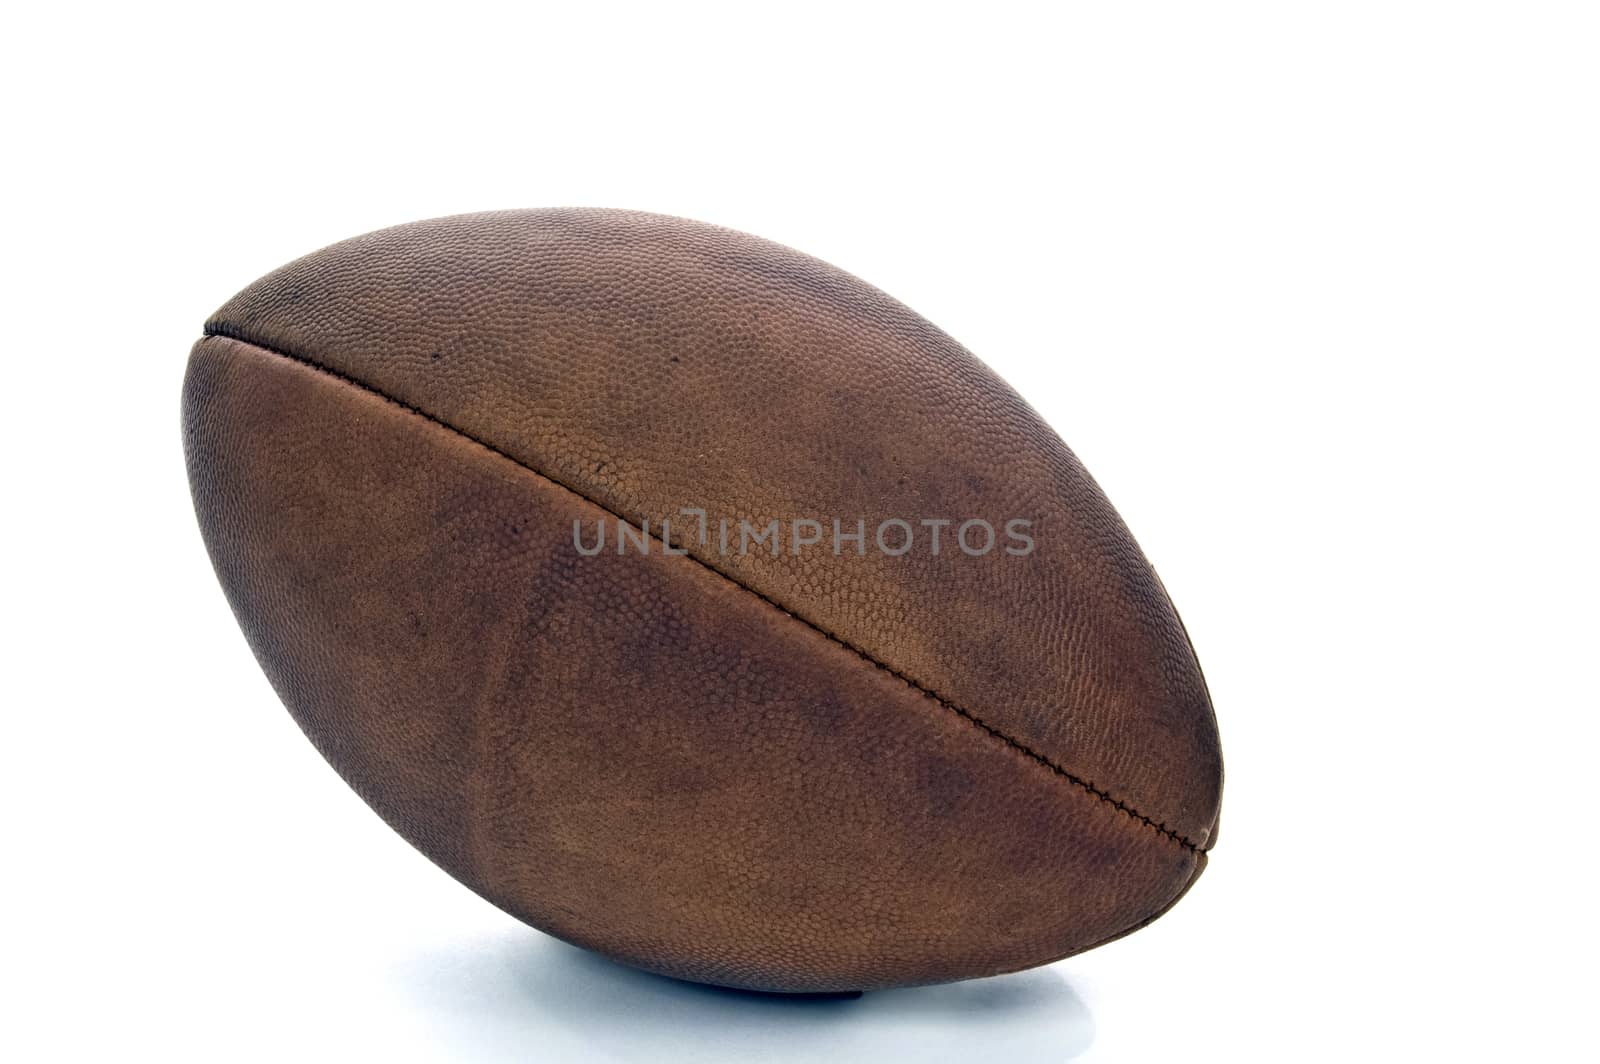 Old Vintage American Football On White Background by stockbuster1